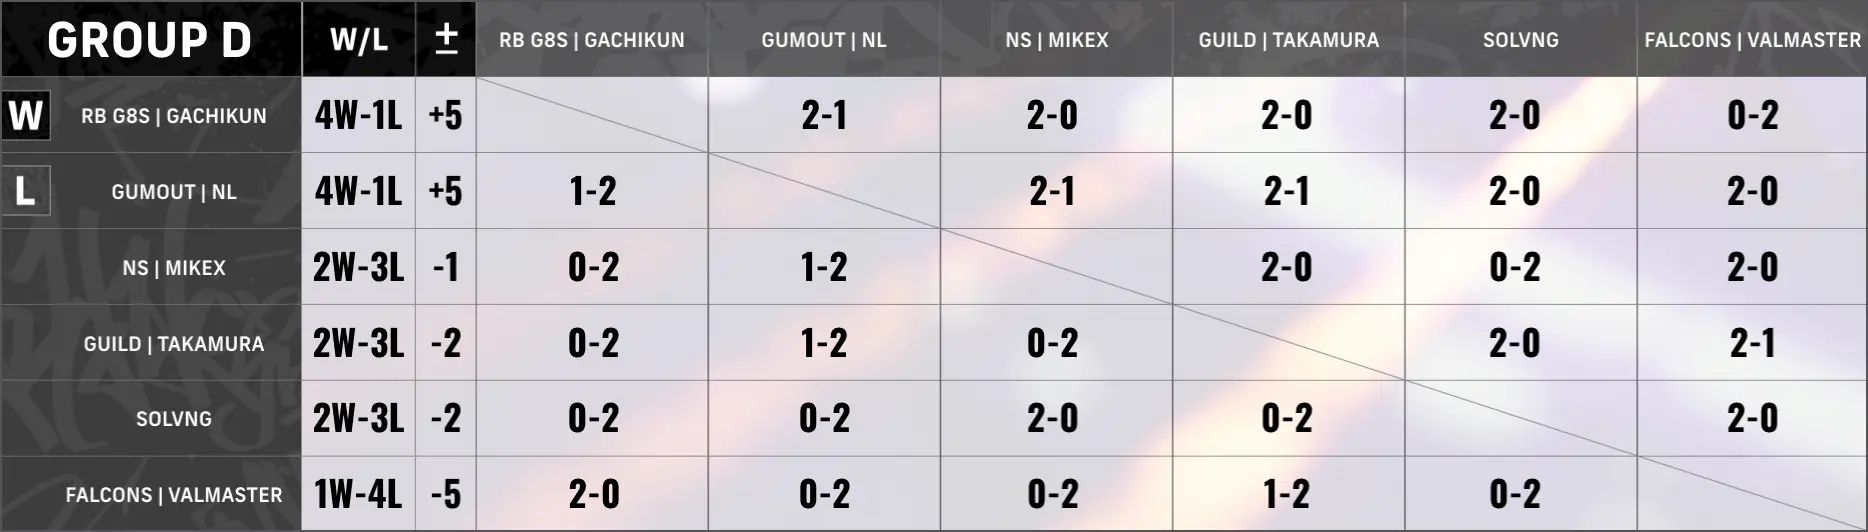 GROUP STANDINGS - Group D - Day 3